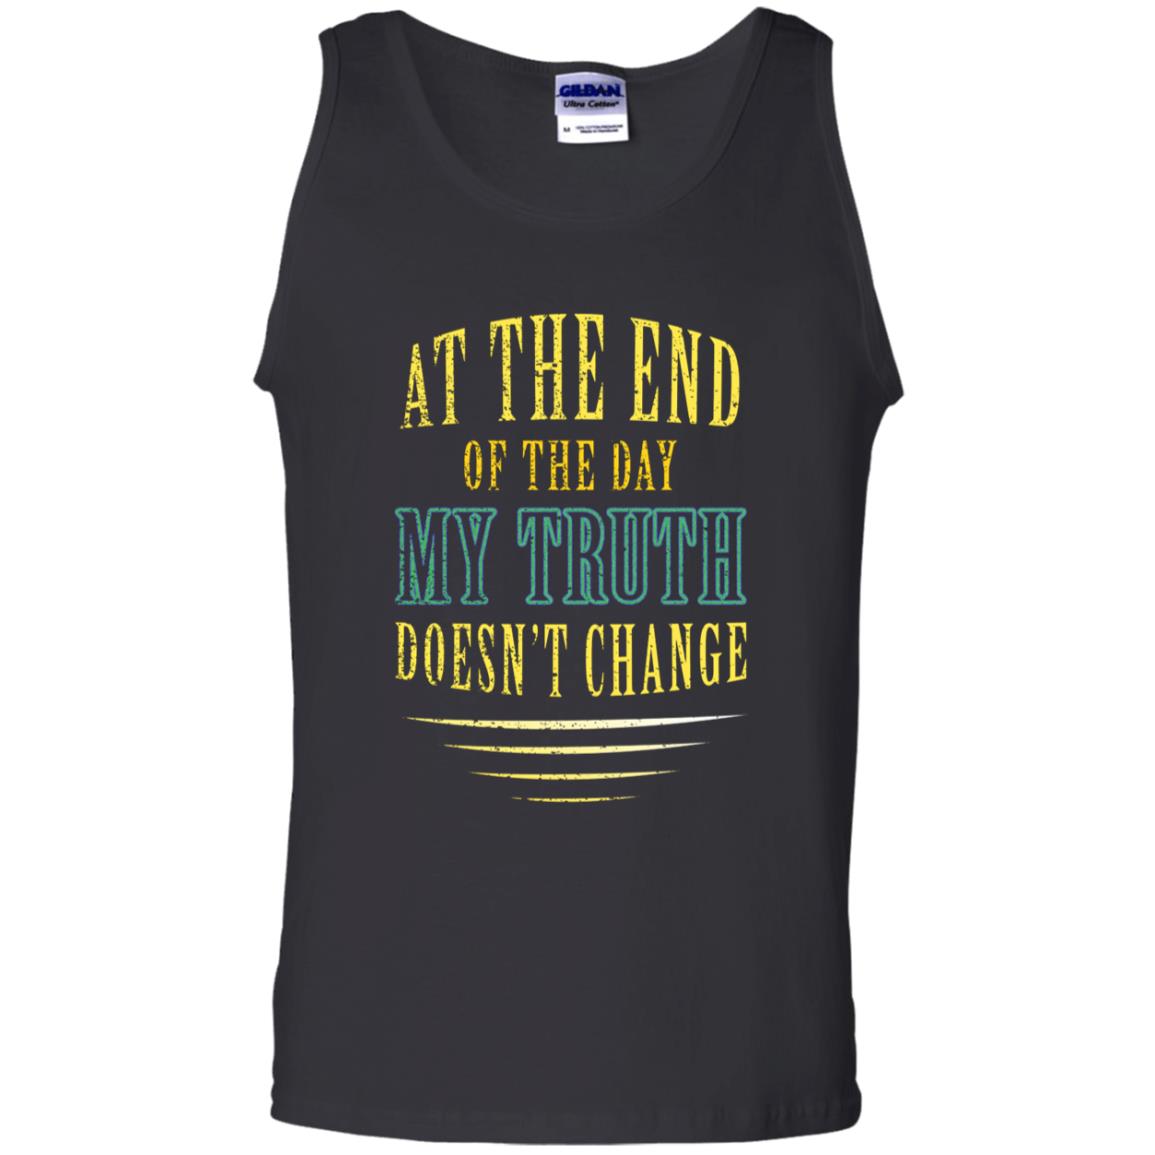 At The End Of The Day My Truth Doesn't Change ShirtG220 Gildan 100% Cotton Tank Top